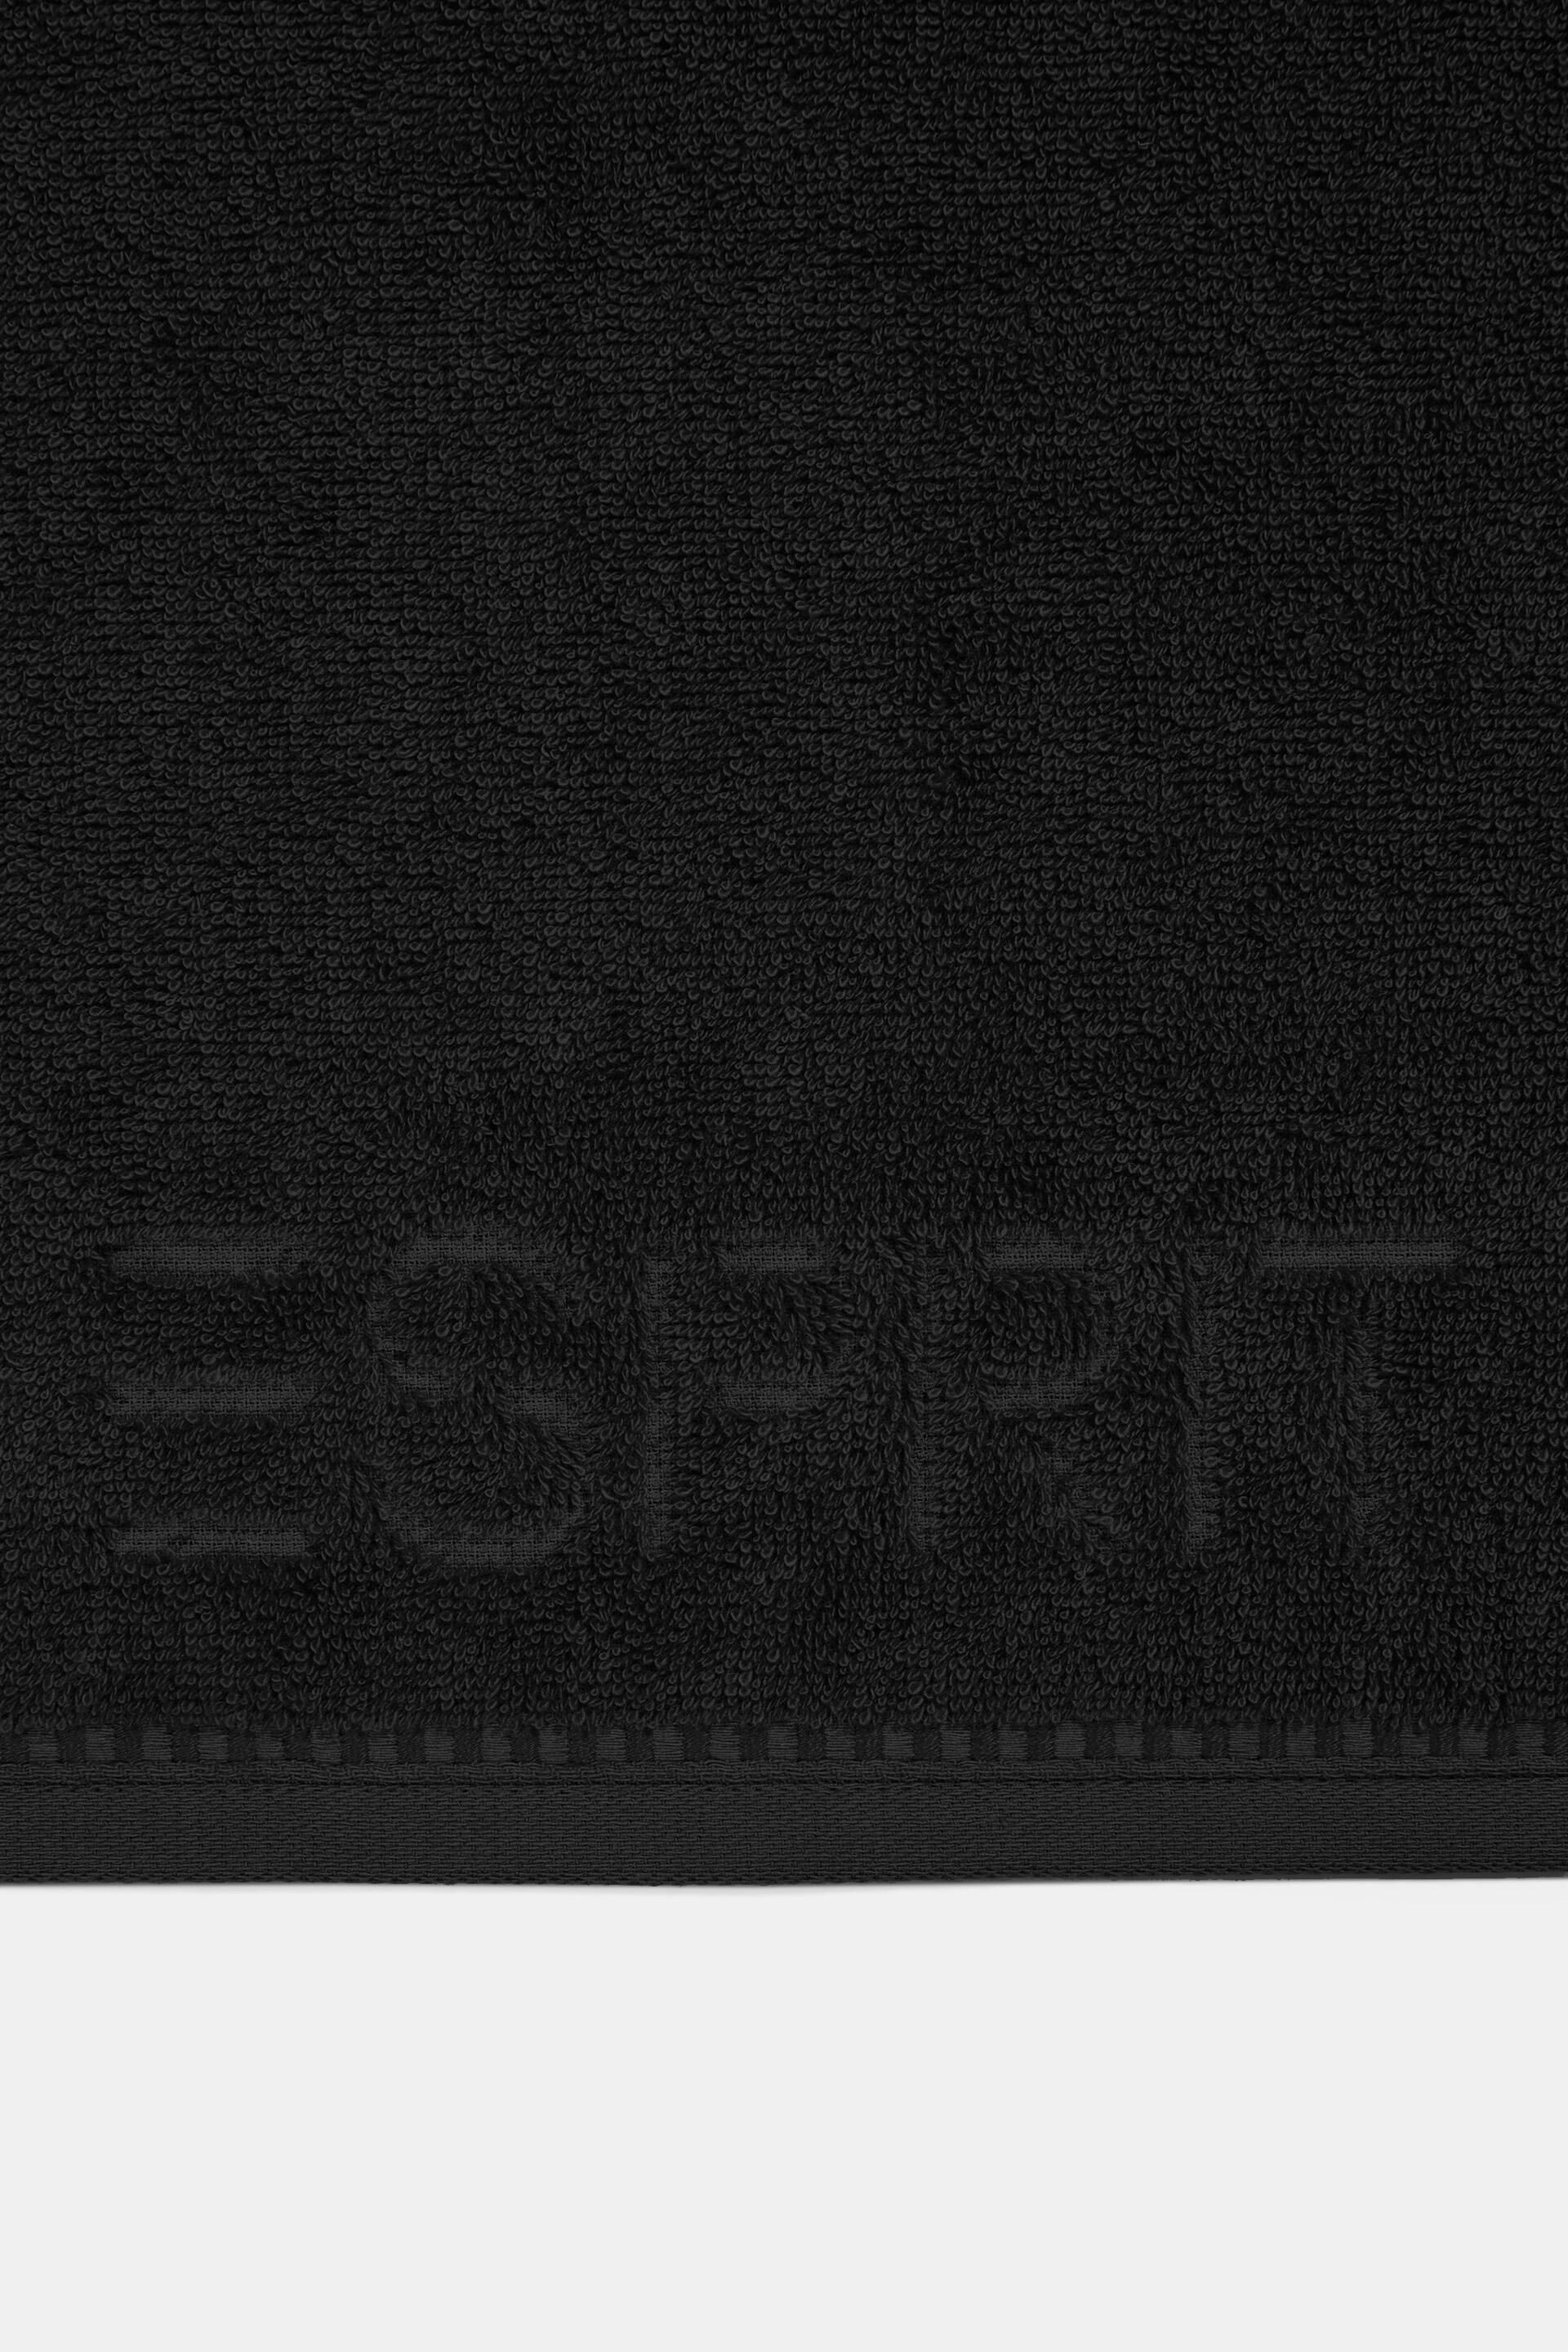 Esprit T Shirt Terry cloth towel collection